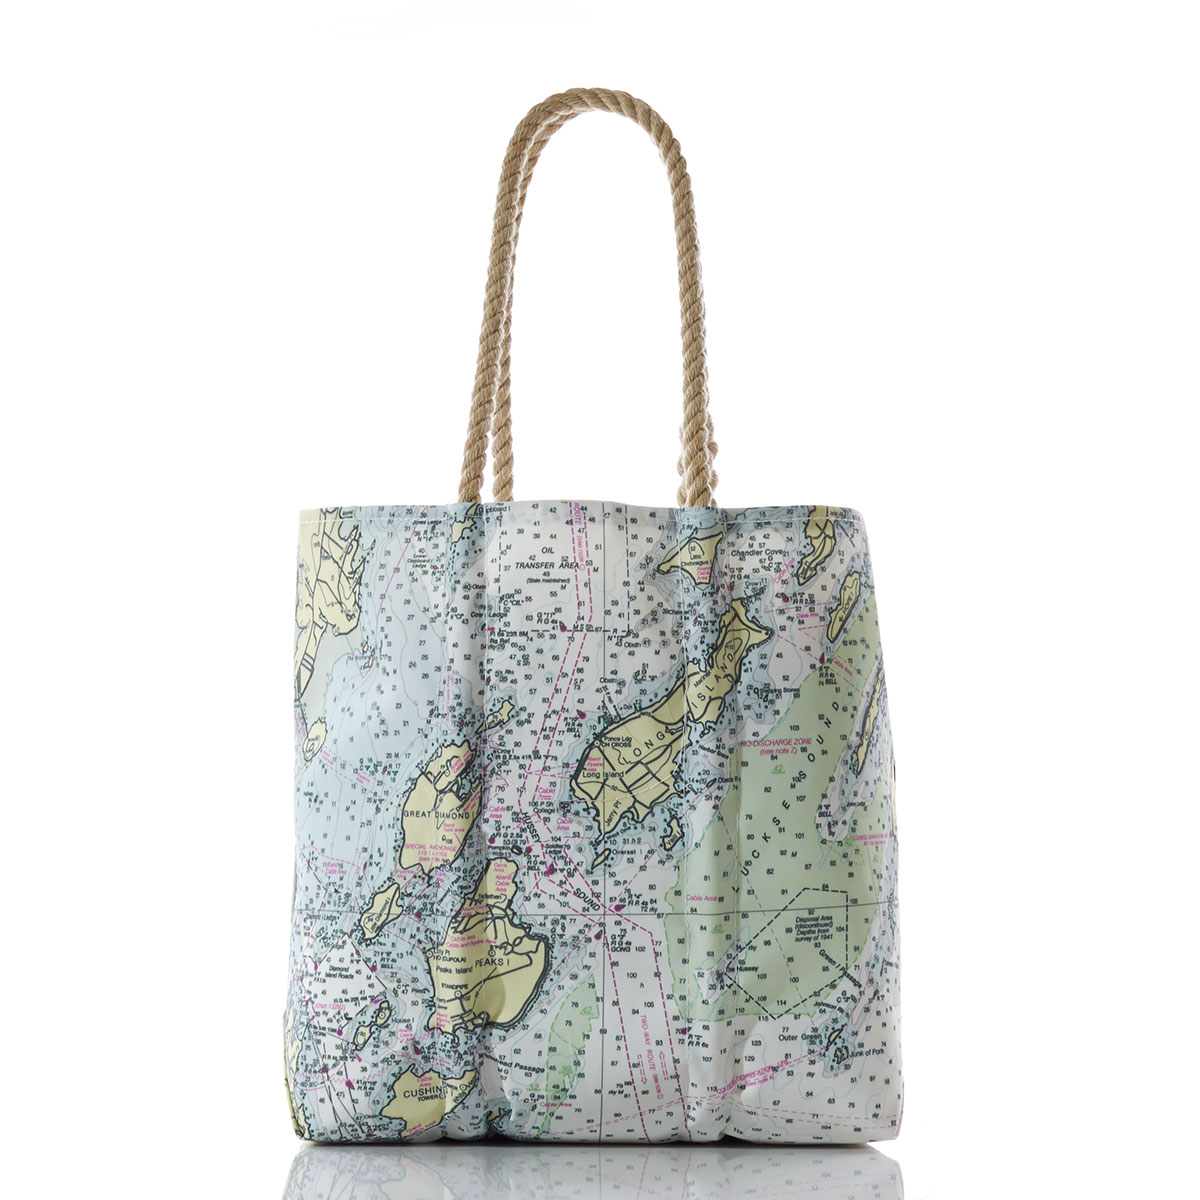 printed nautical chart of casco bay on recycled sail cloth tote with hemp rope handles